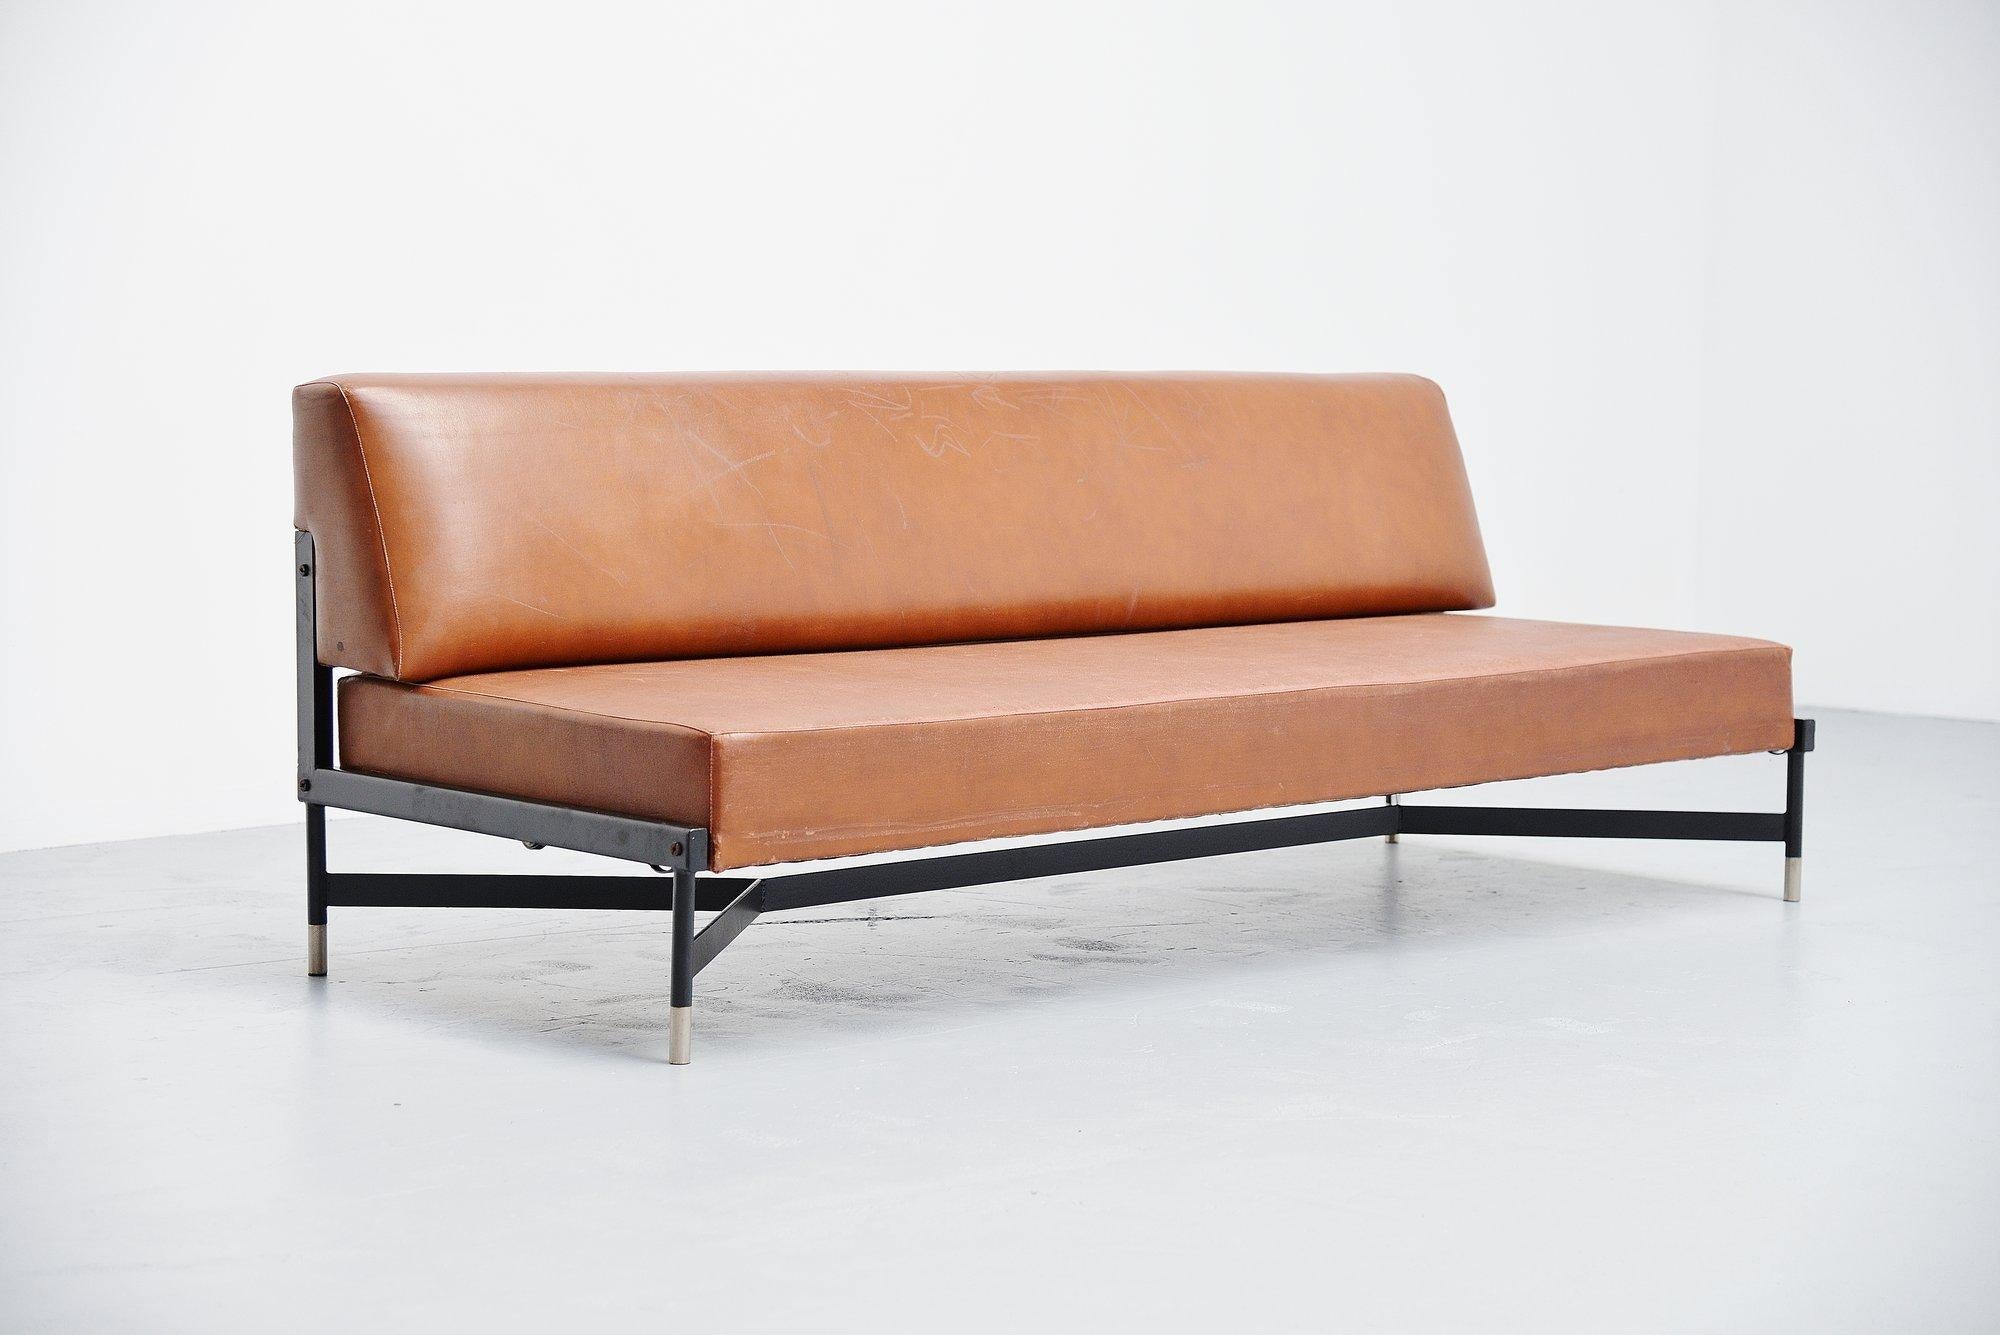 Nice Italian modernist sleeping sofa made and designed by Rossi di Albizzate, Italy 1950. A very important Italian sofa by Rossi di Albizzate, an Italian furniture company in Varese that is making Italian quality furniture for over 80 years now.